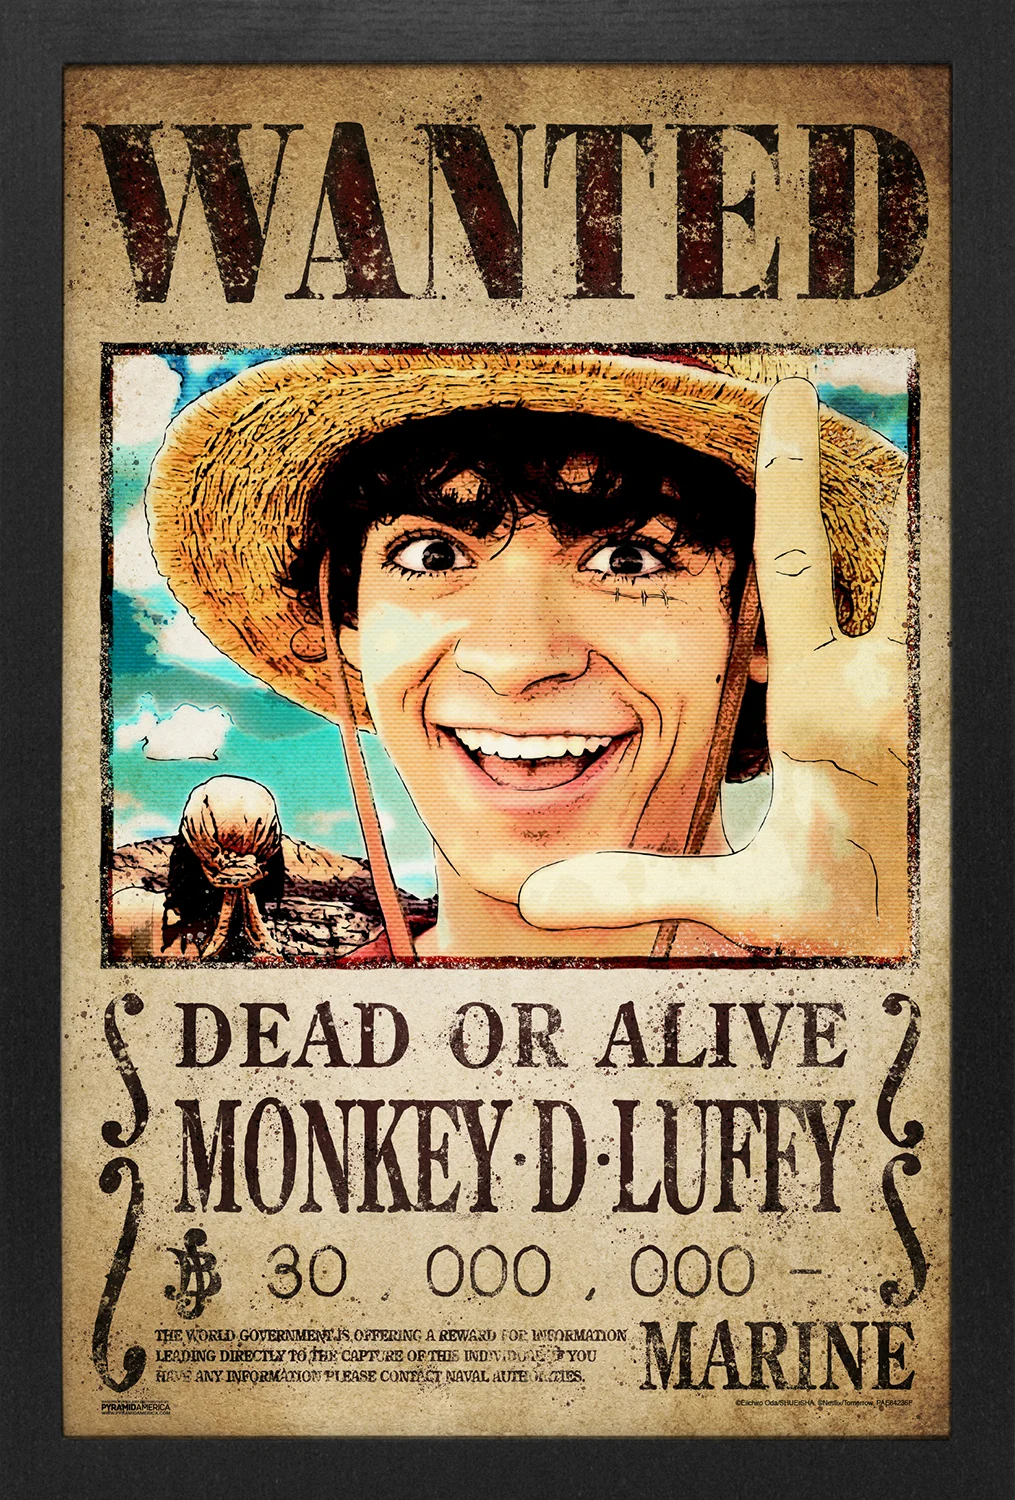 One Piece (Live Action) - Luffy WANTED (11"x17" Gel-Coat) (Order in multiples of 6, mix and match styles)